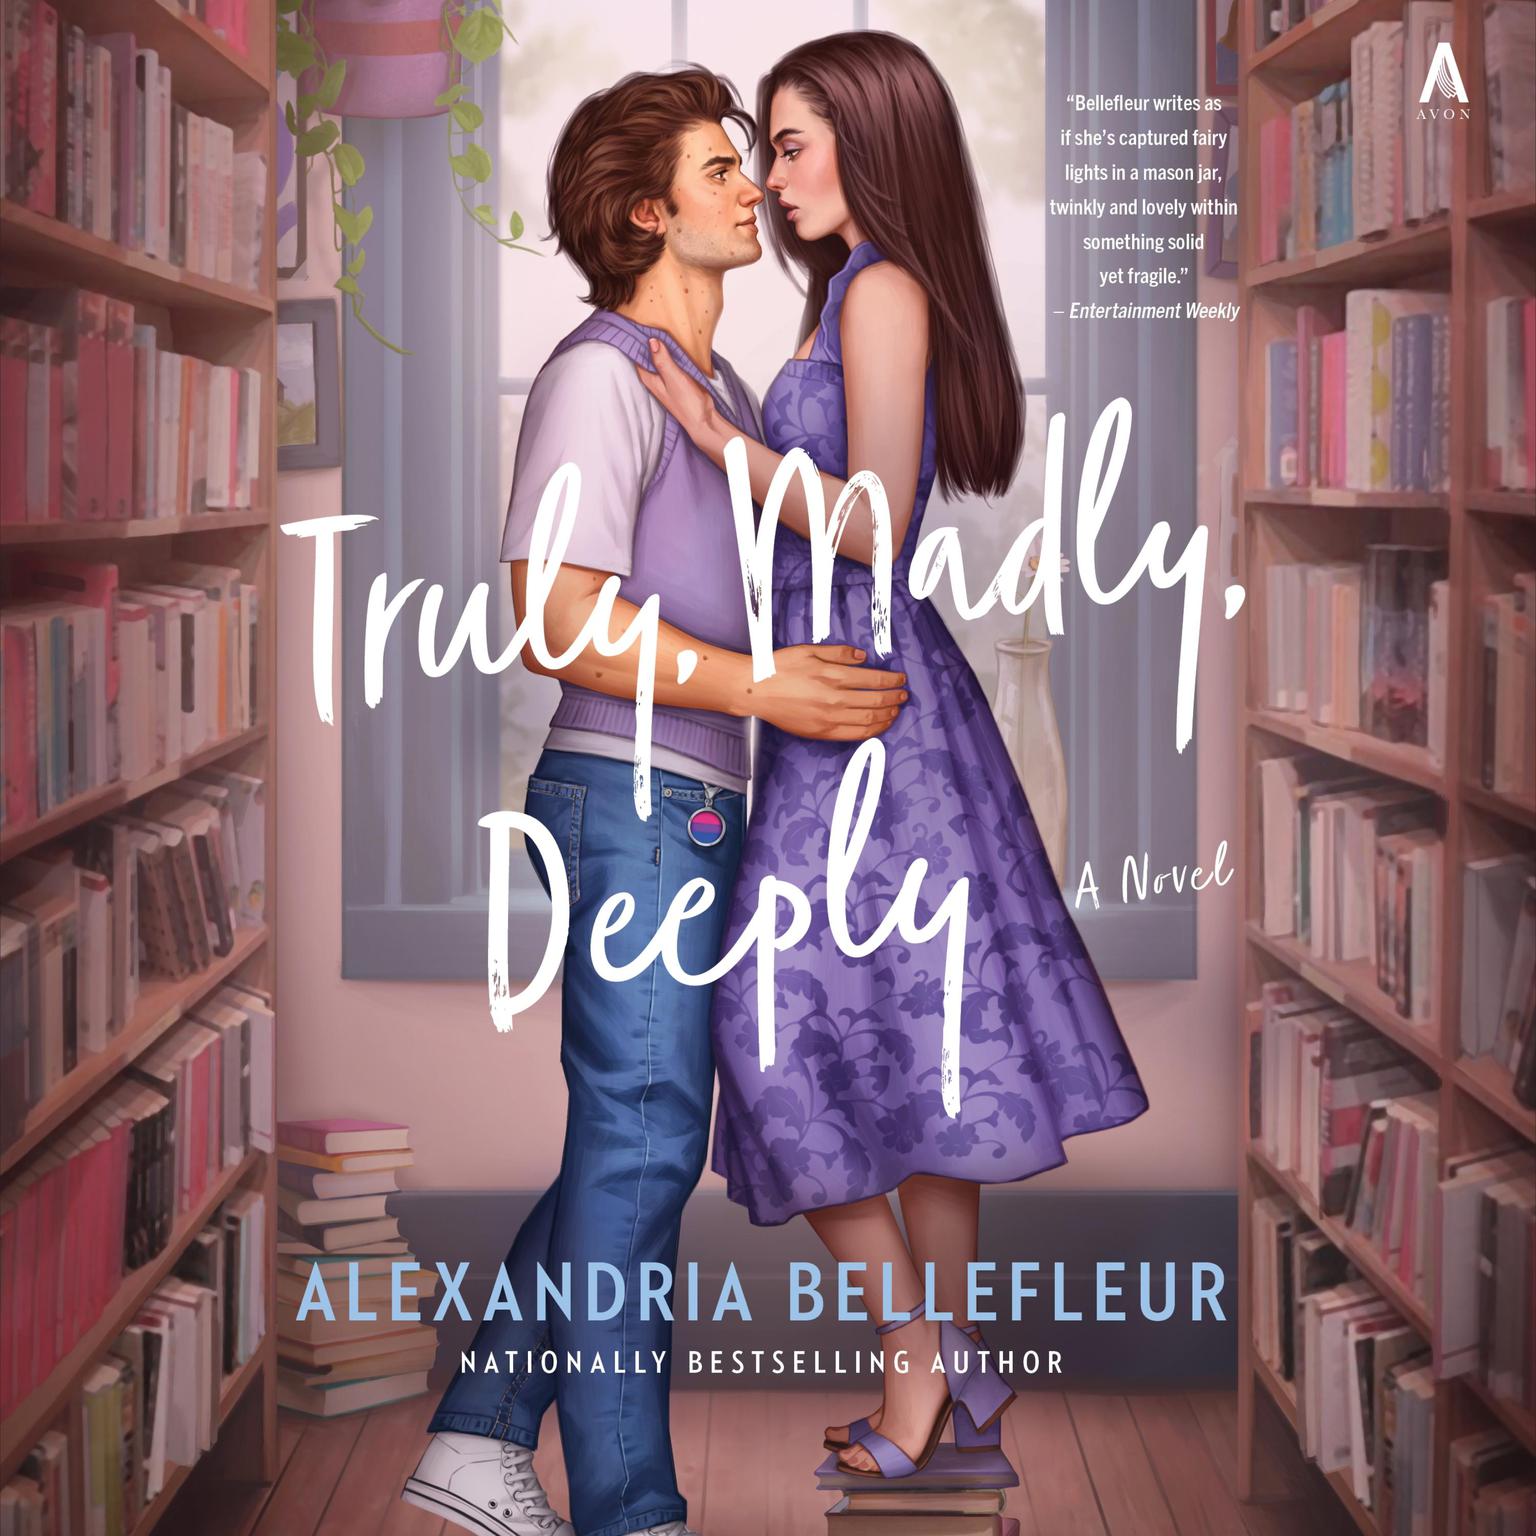 Truly, Madly, Deeply: A Novel Audiobook, by Alexandria Bellefleur